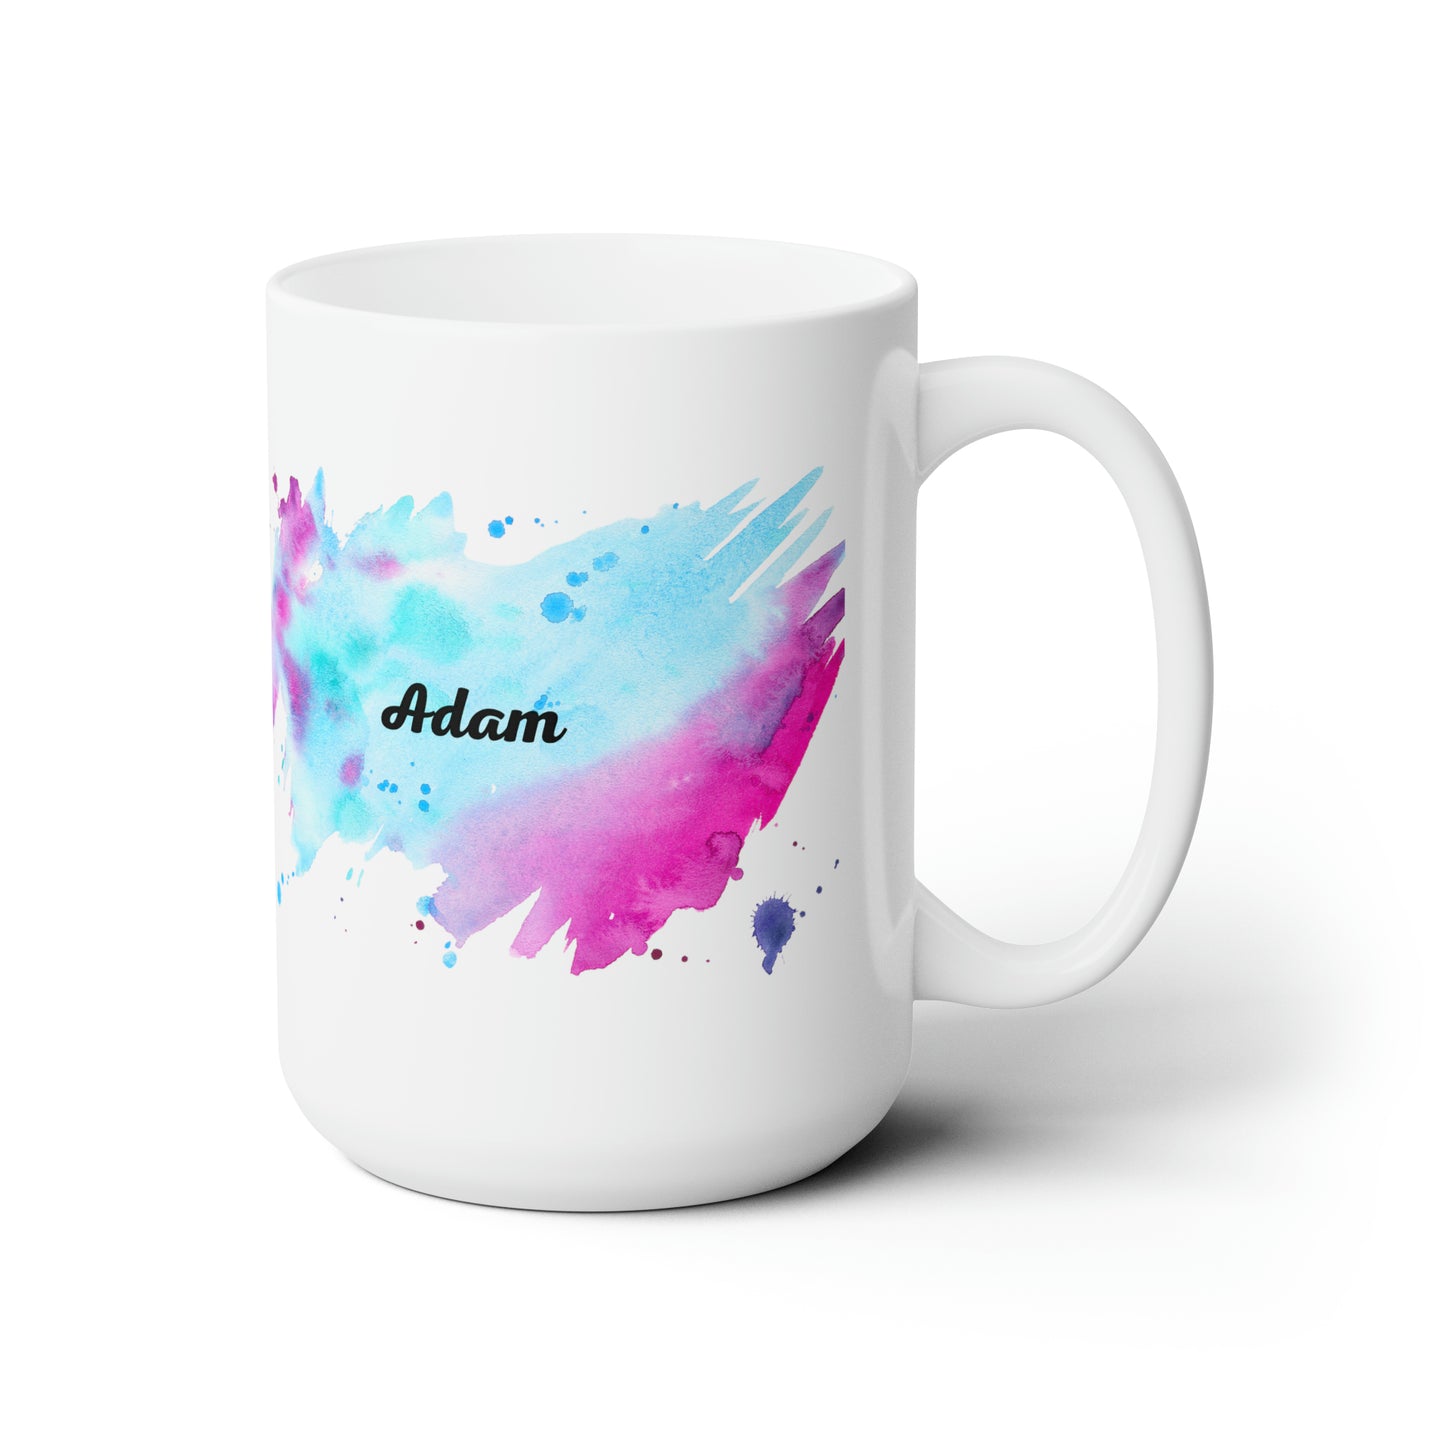 Personalized mugs, perfect for gifts to coffee lovers 15oz